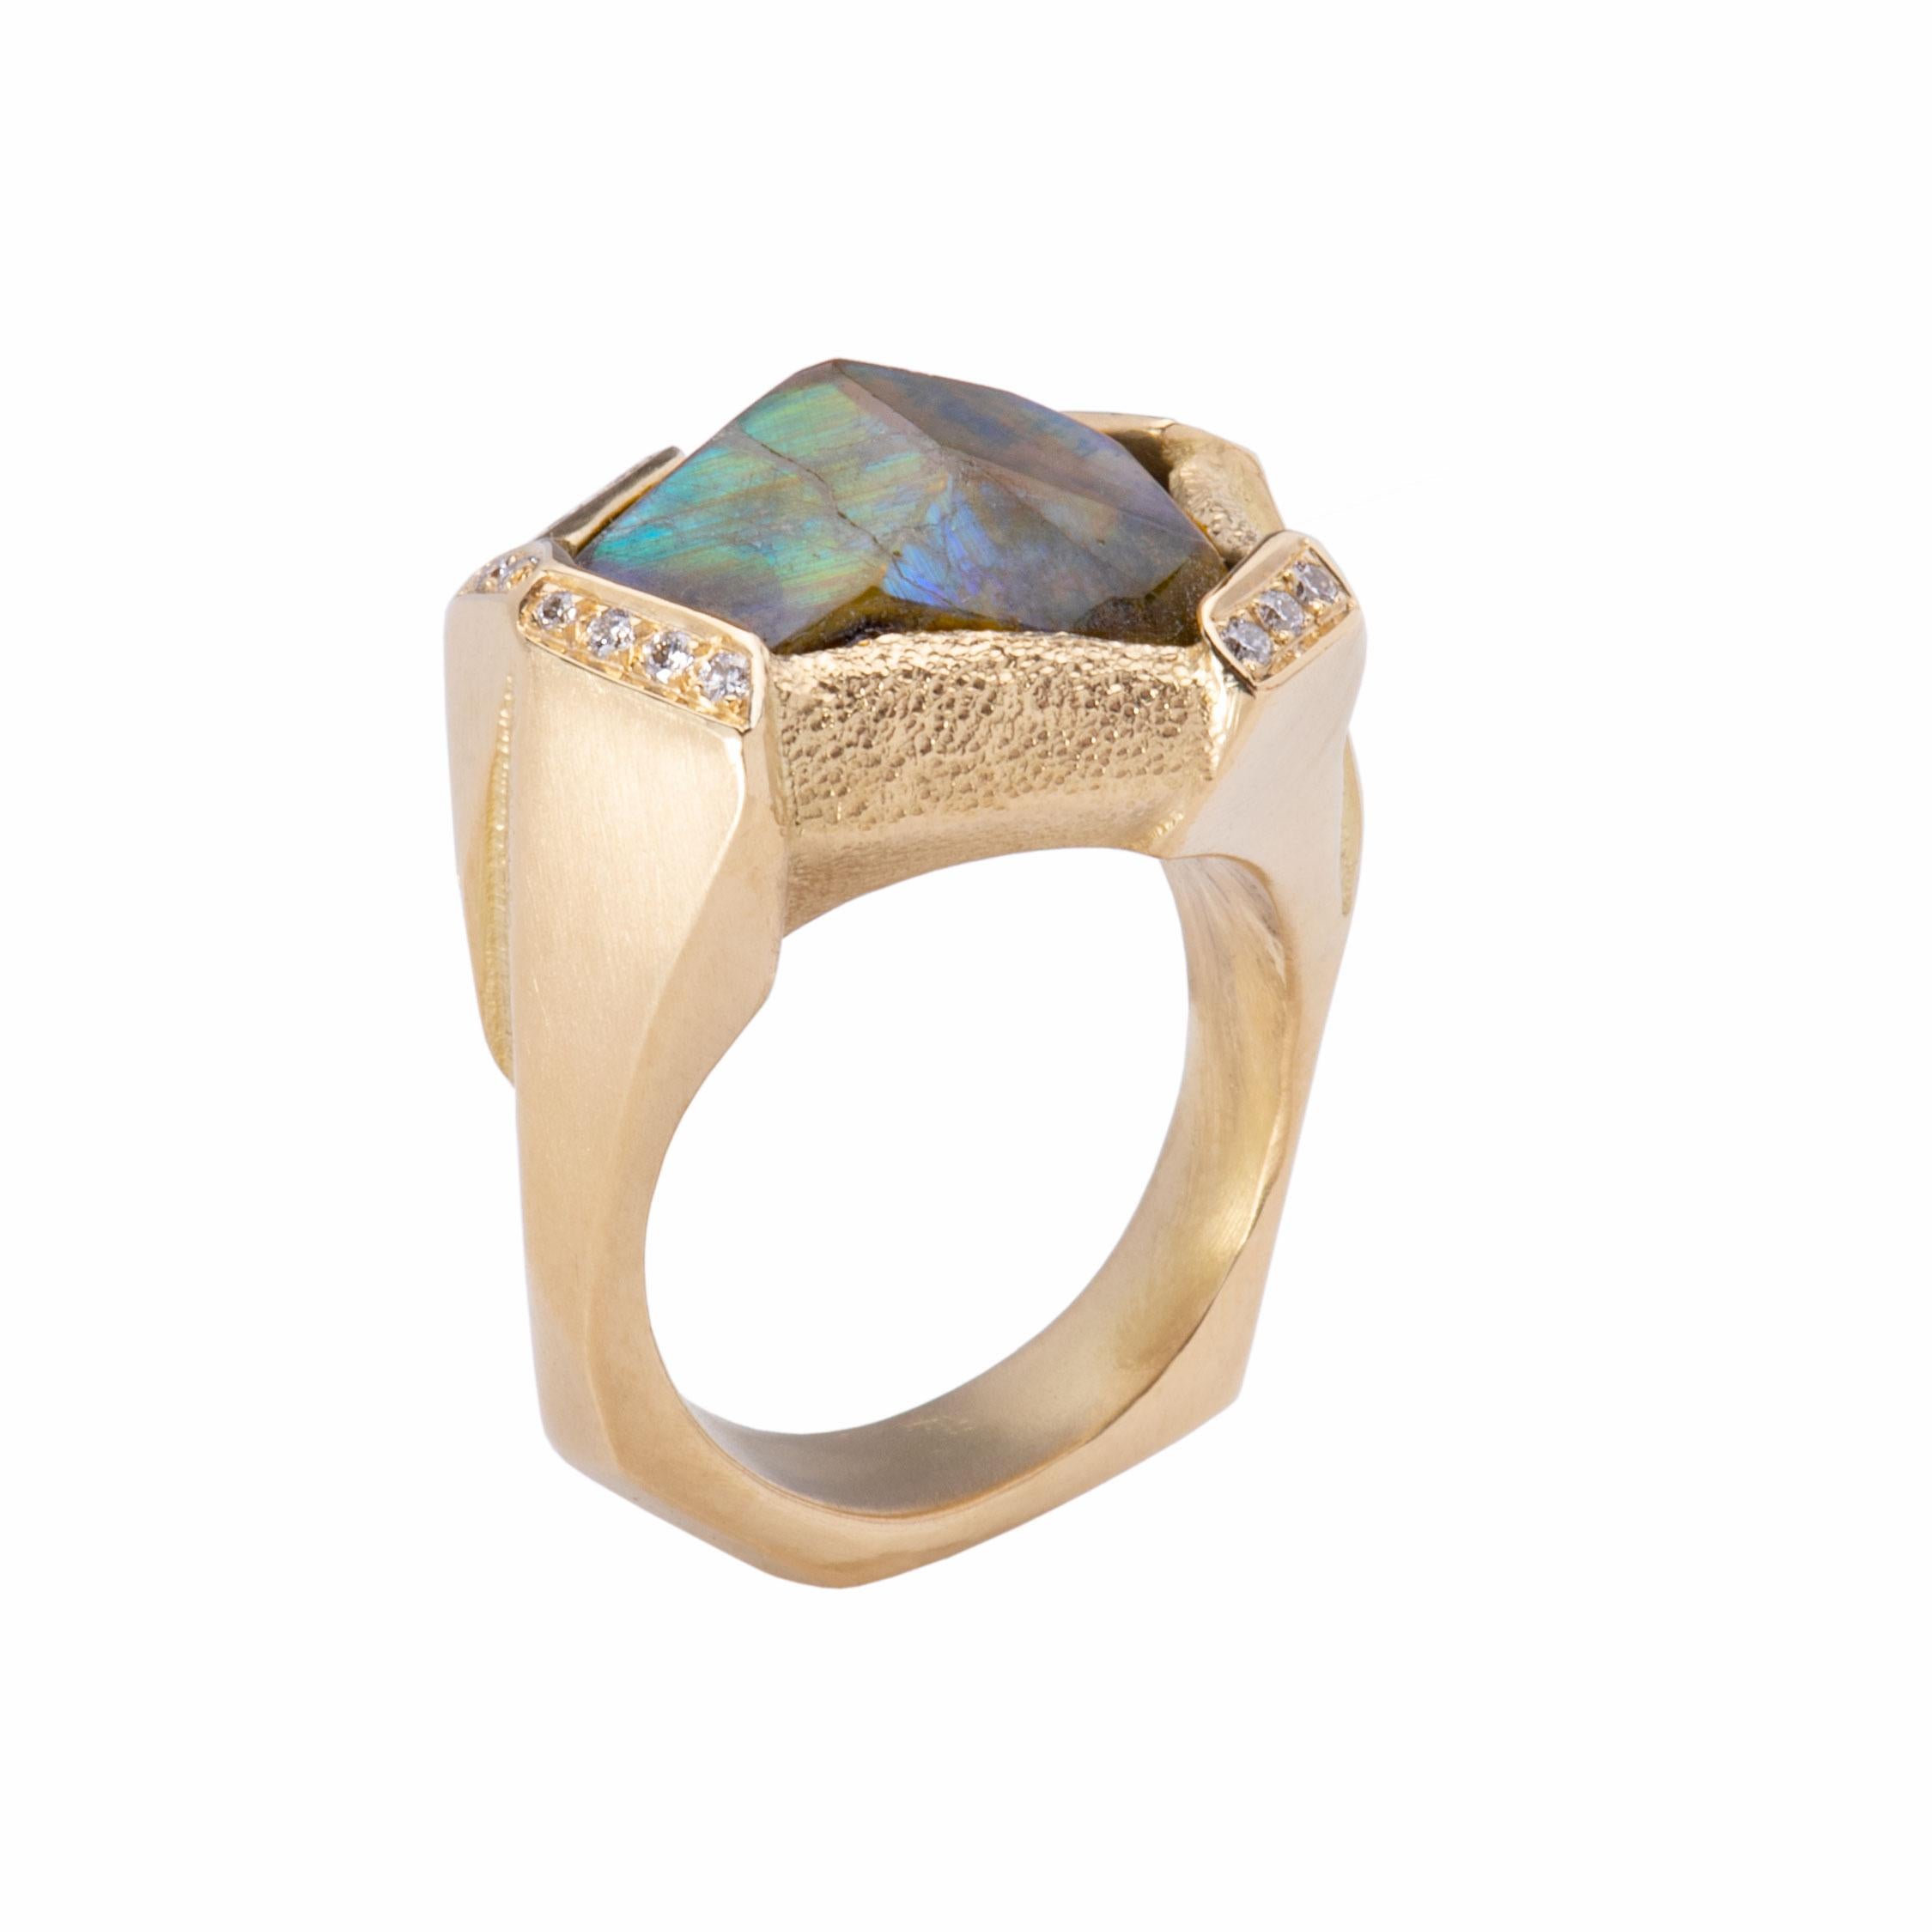 An iridescent andradite garnet 15cts is edged with brilliant white diamonds .23cts and set in 18k gold. An asymmetrical setting composed of satin and stippled gold adds to the style appeal of this extraordinary ring. Hand crafted, this dramatic, eye